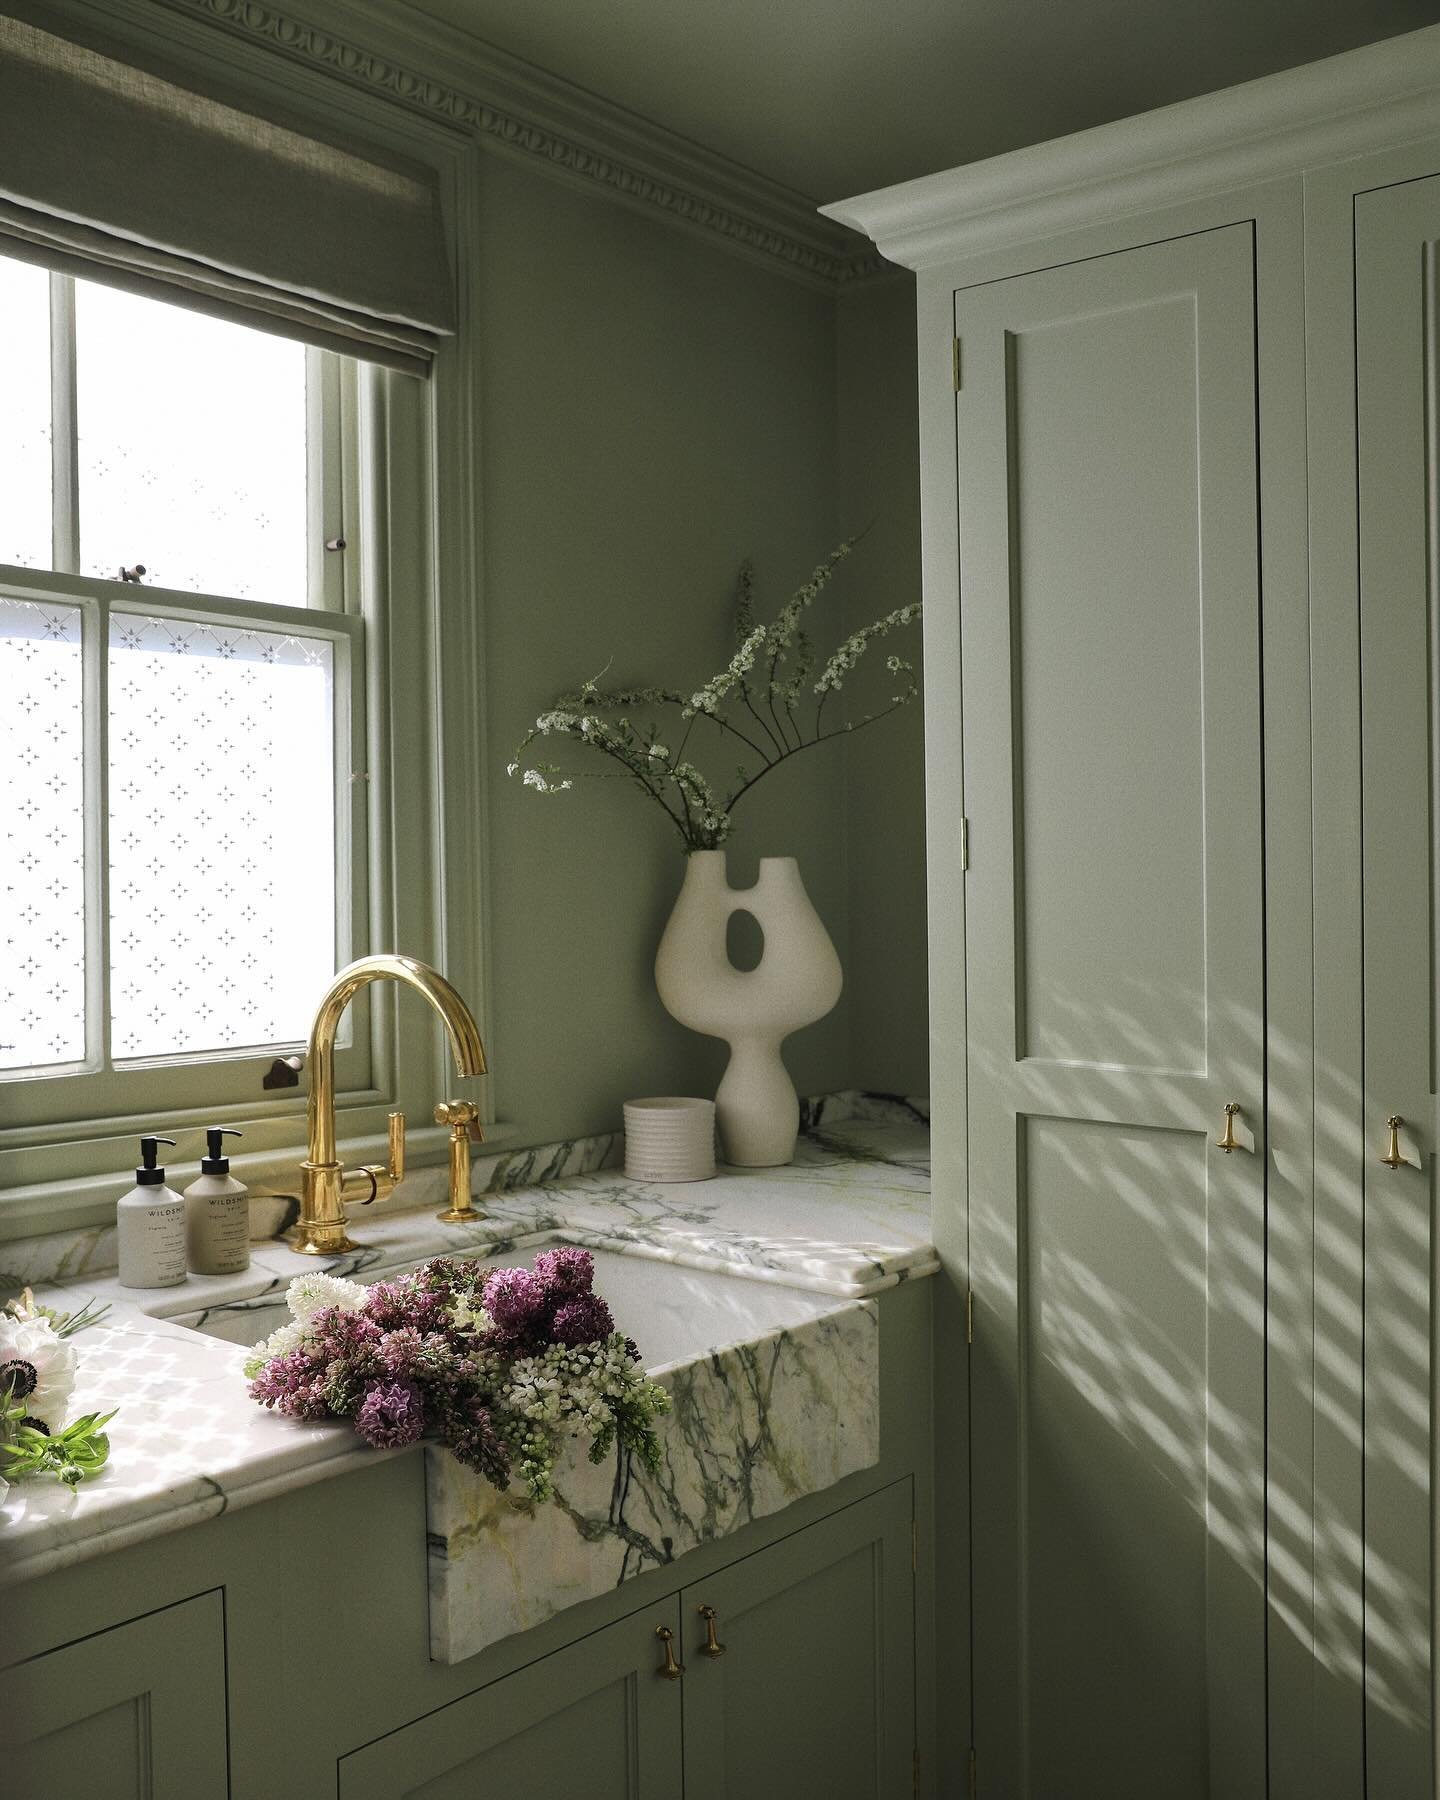 Bringing spring into our utility room, a place where form, beauty and function coexist.

We knew this space was going to be used every day so it needed to be carefully considered, created using quality materials and also have its own identity. It&rsq